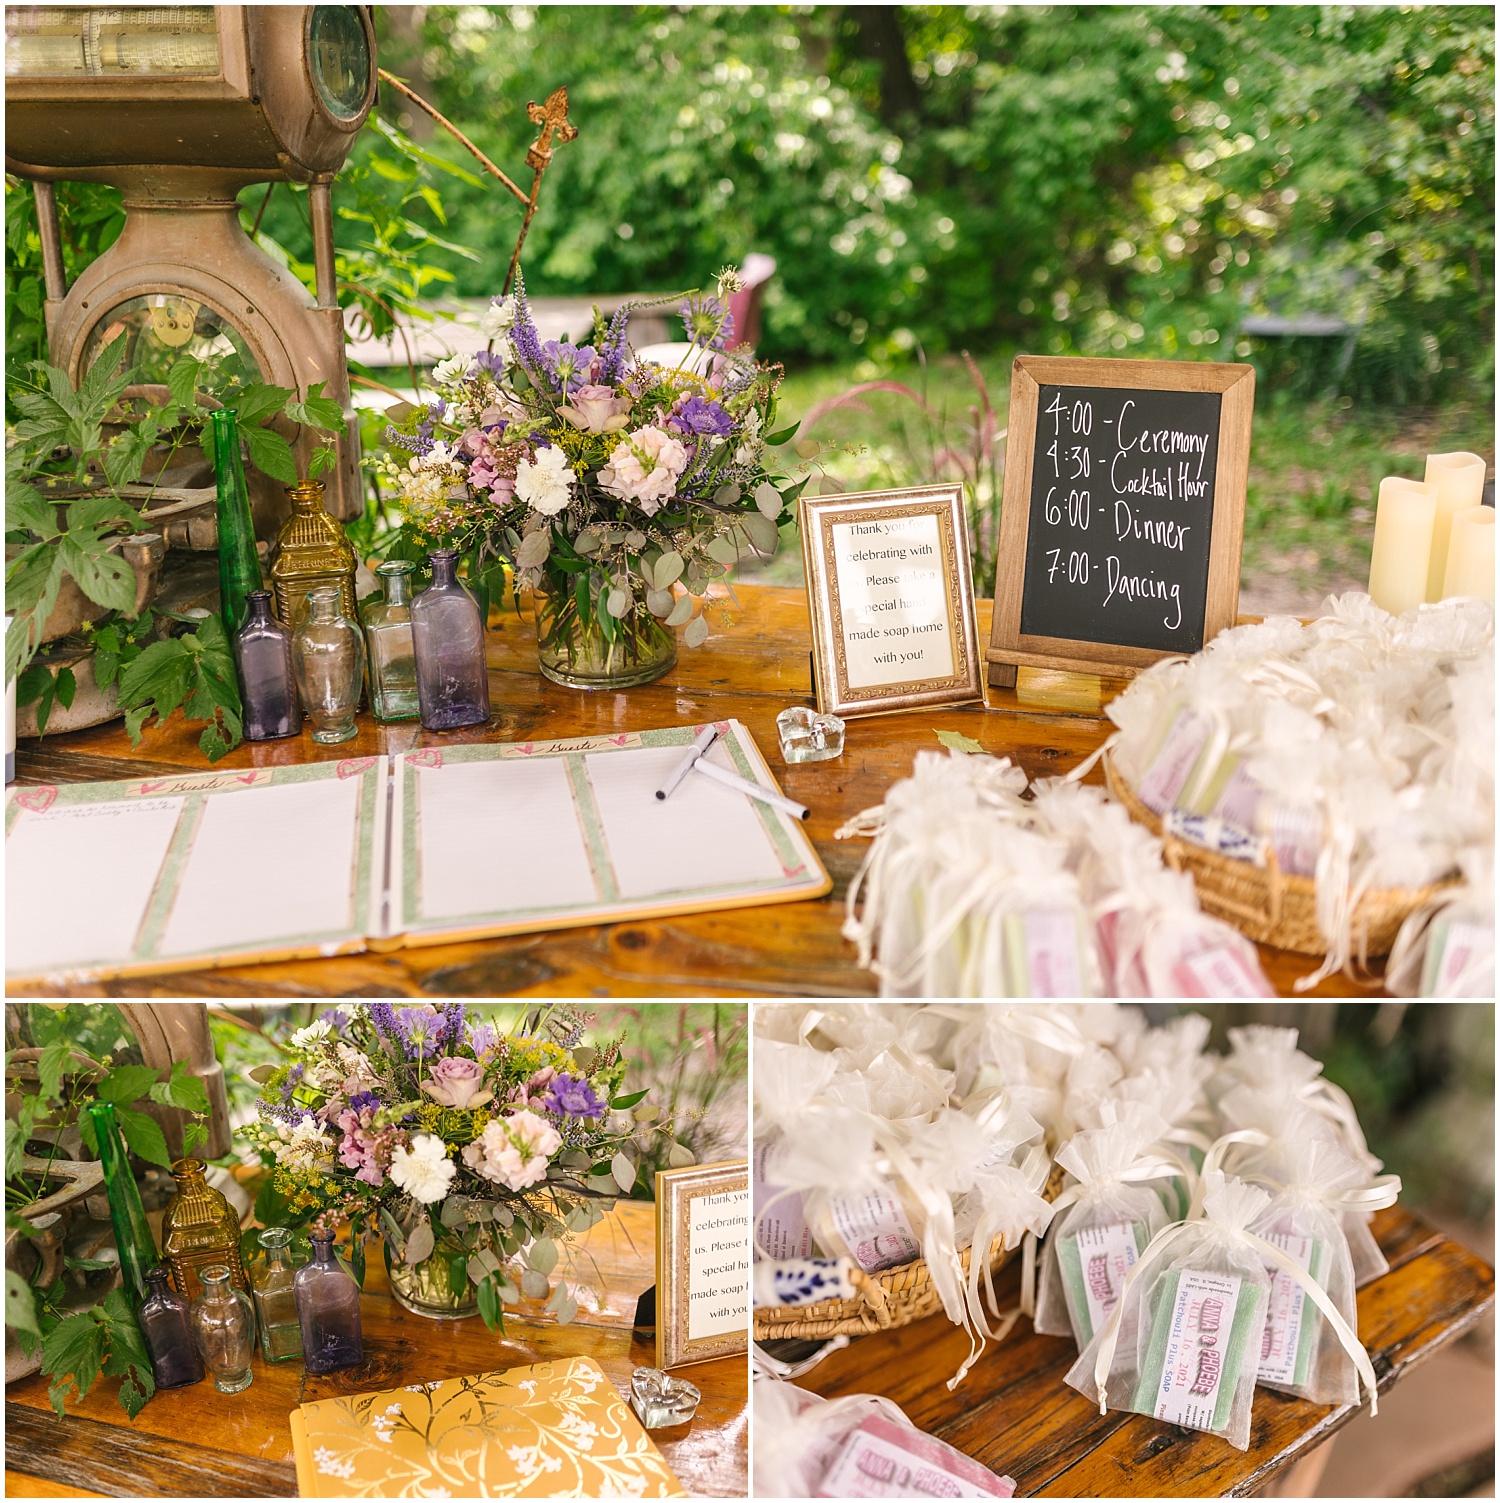 Rustic vases and floral details for an enchanted garden wedding vibe